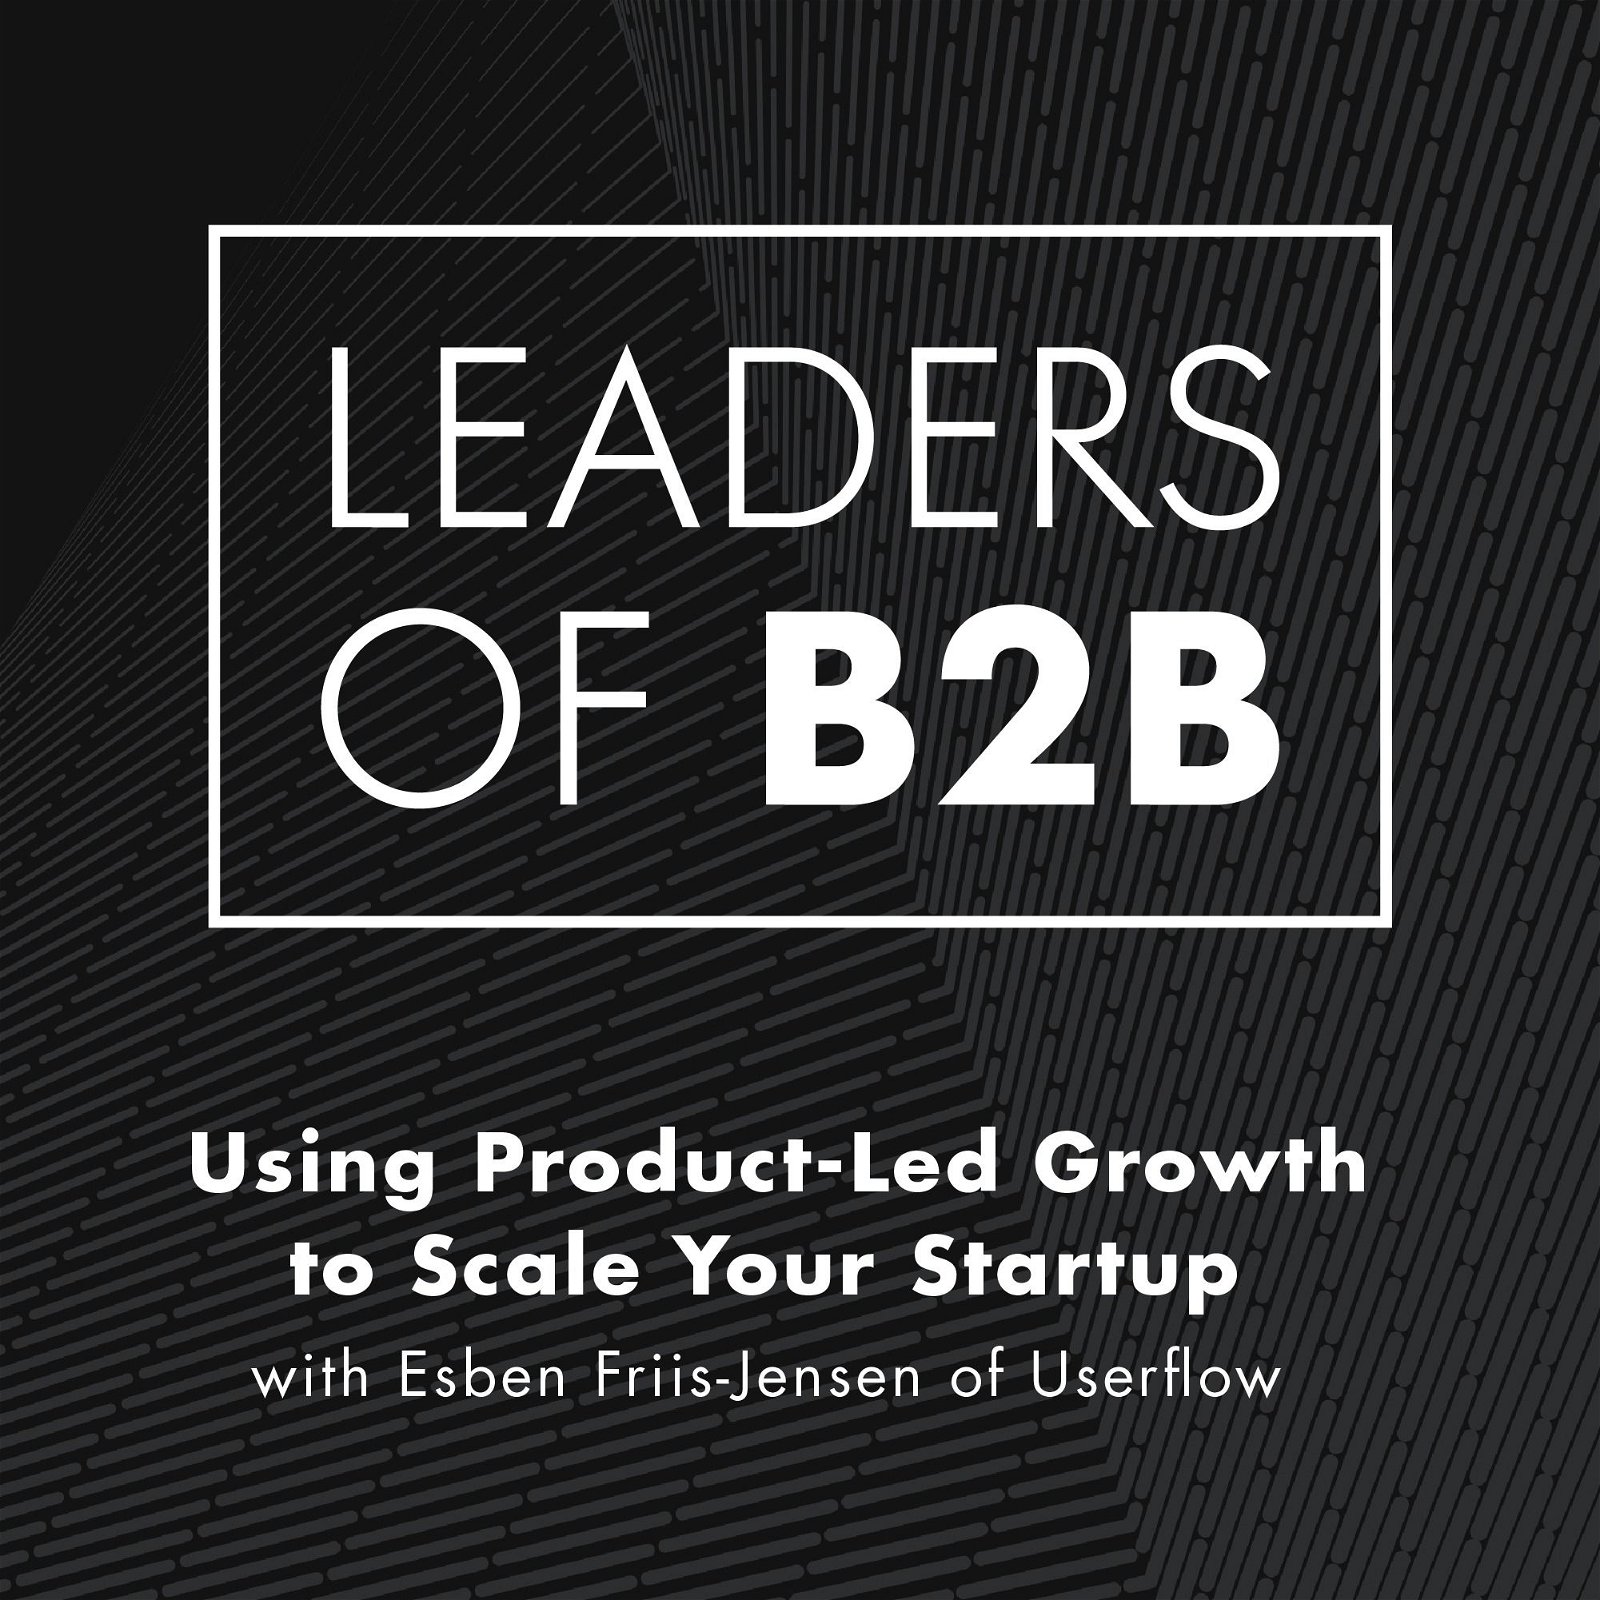 Using Product-Led Growth to Scale Your Startup with Esben Friis-Jensen of Userflow